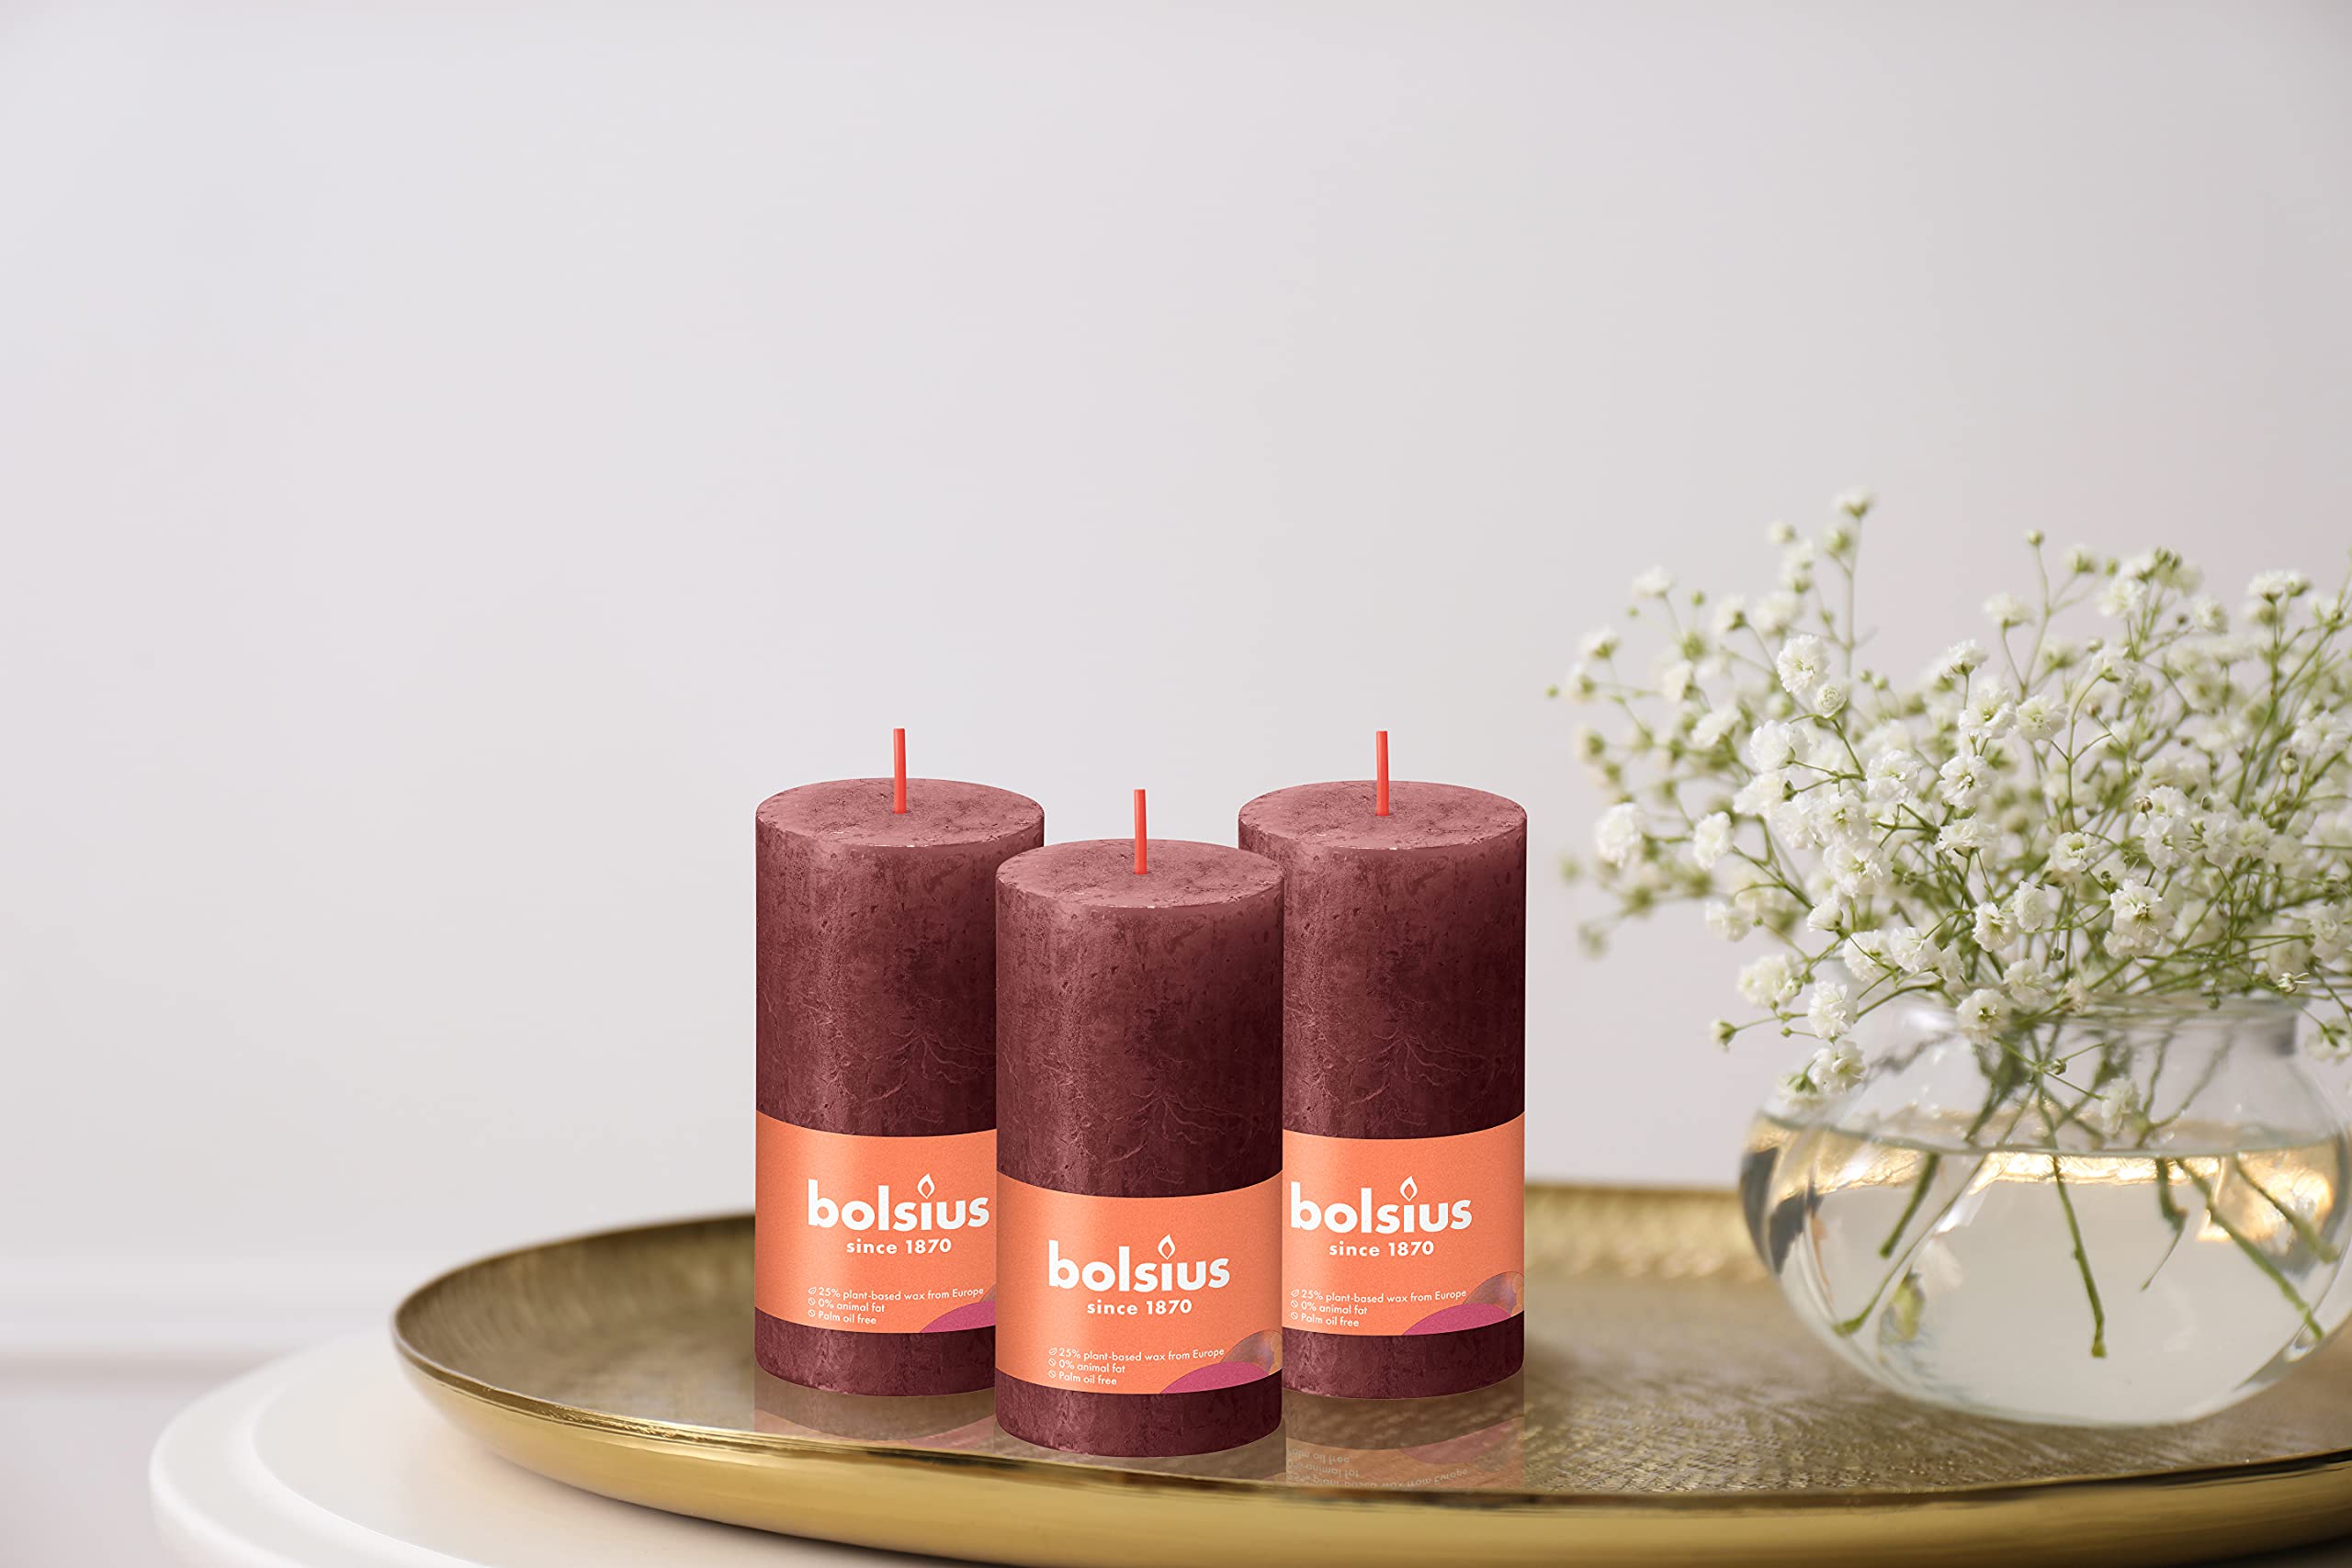 BOLSIUS 4 Pack Velvet Red Rustic Pillar Candles - 2 X 4 Inches - Premium European Quality - Includes Natural Plant-Based Wax - Unscented Dripless Smokeless 30 Hour Party D�cor and Wedding Candles  - Like New